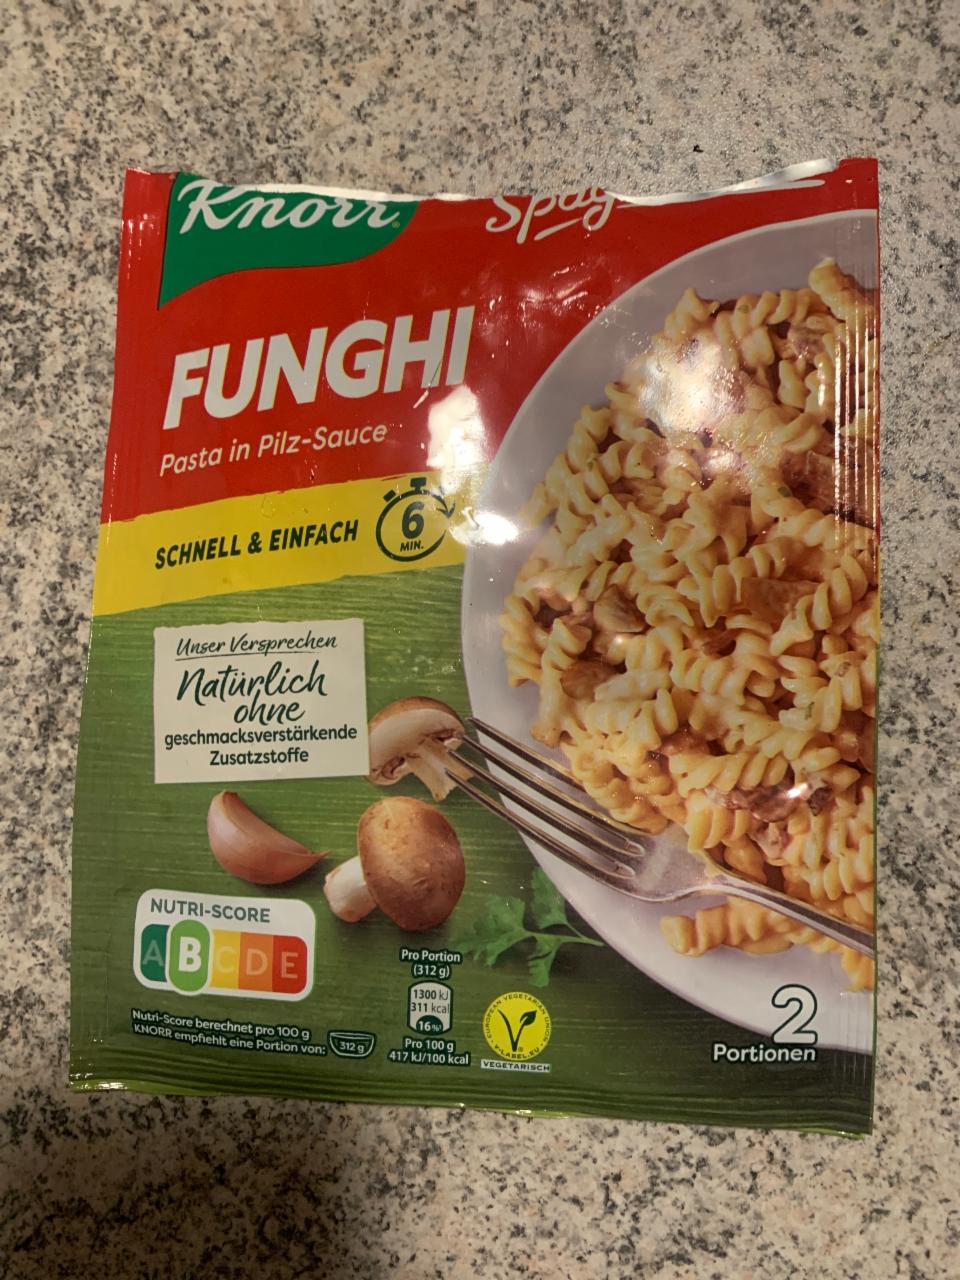 Фото - Funghi Pasta in Pilz-Sauce Spaghetteria Knorr